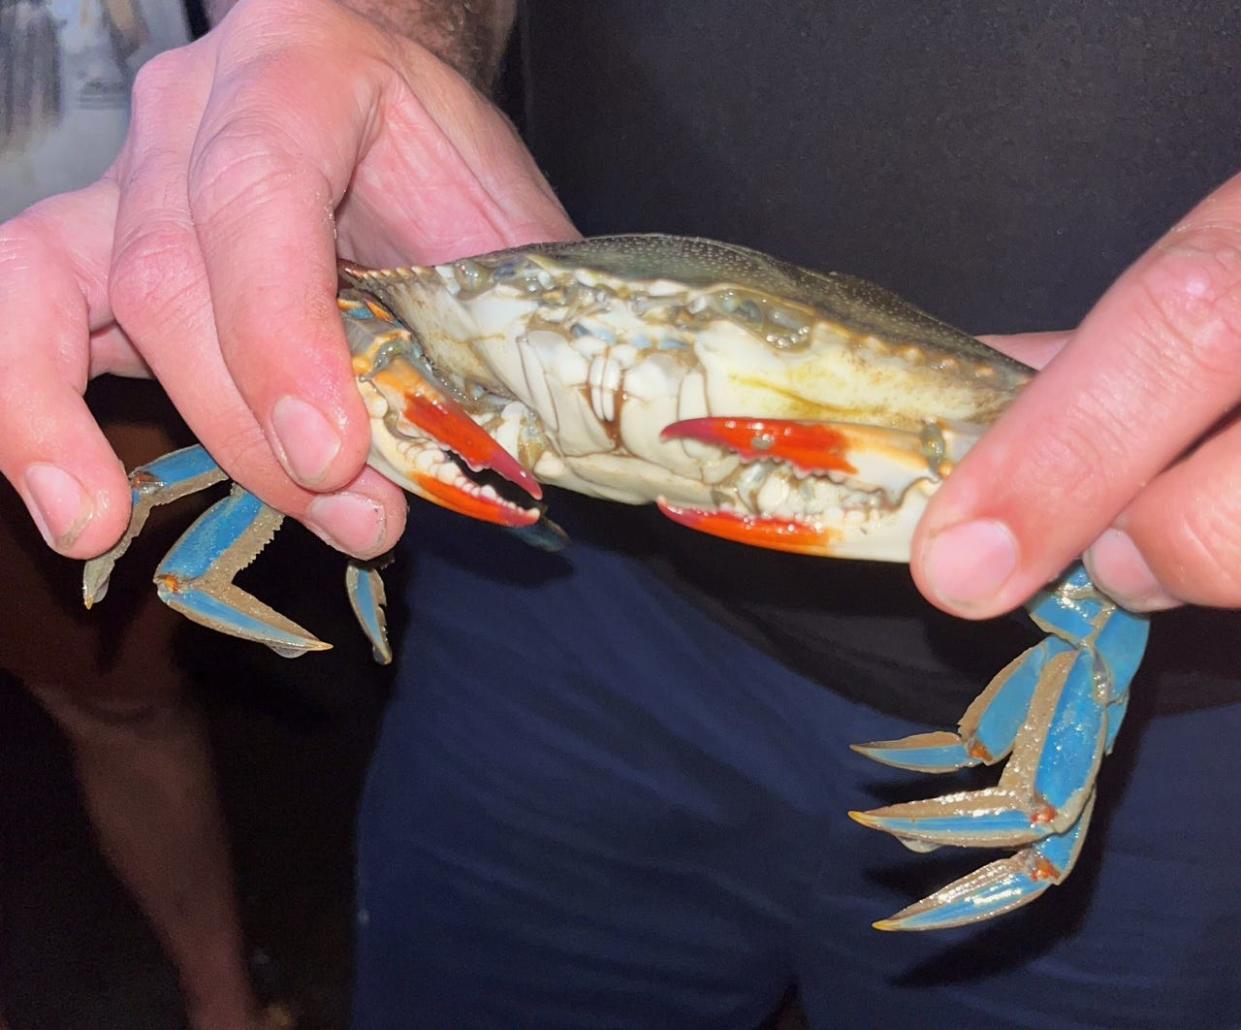 The claws of a common blue crab sport patriotic colors of red, white and blue. [Photo courtesy Laura Kojima]